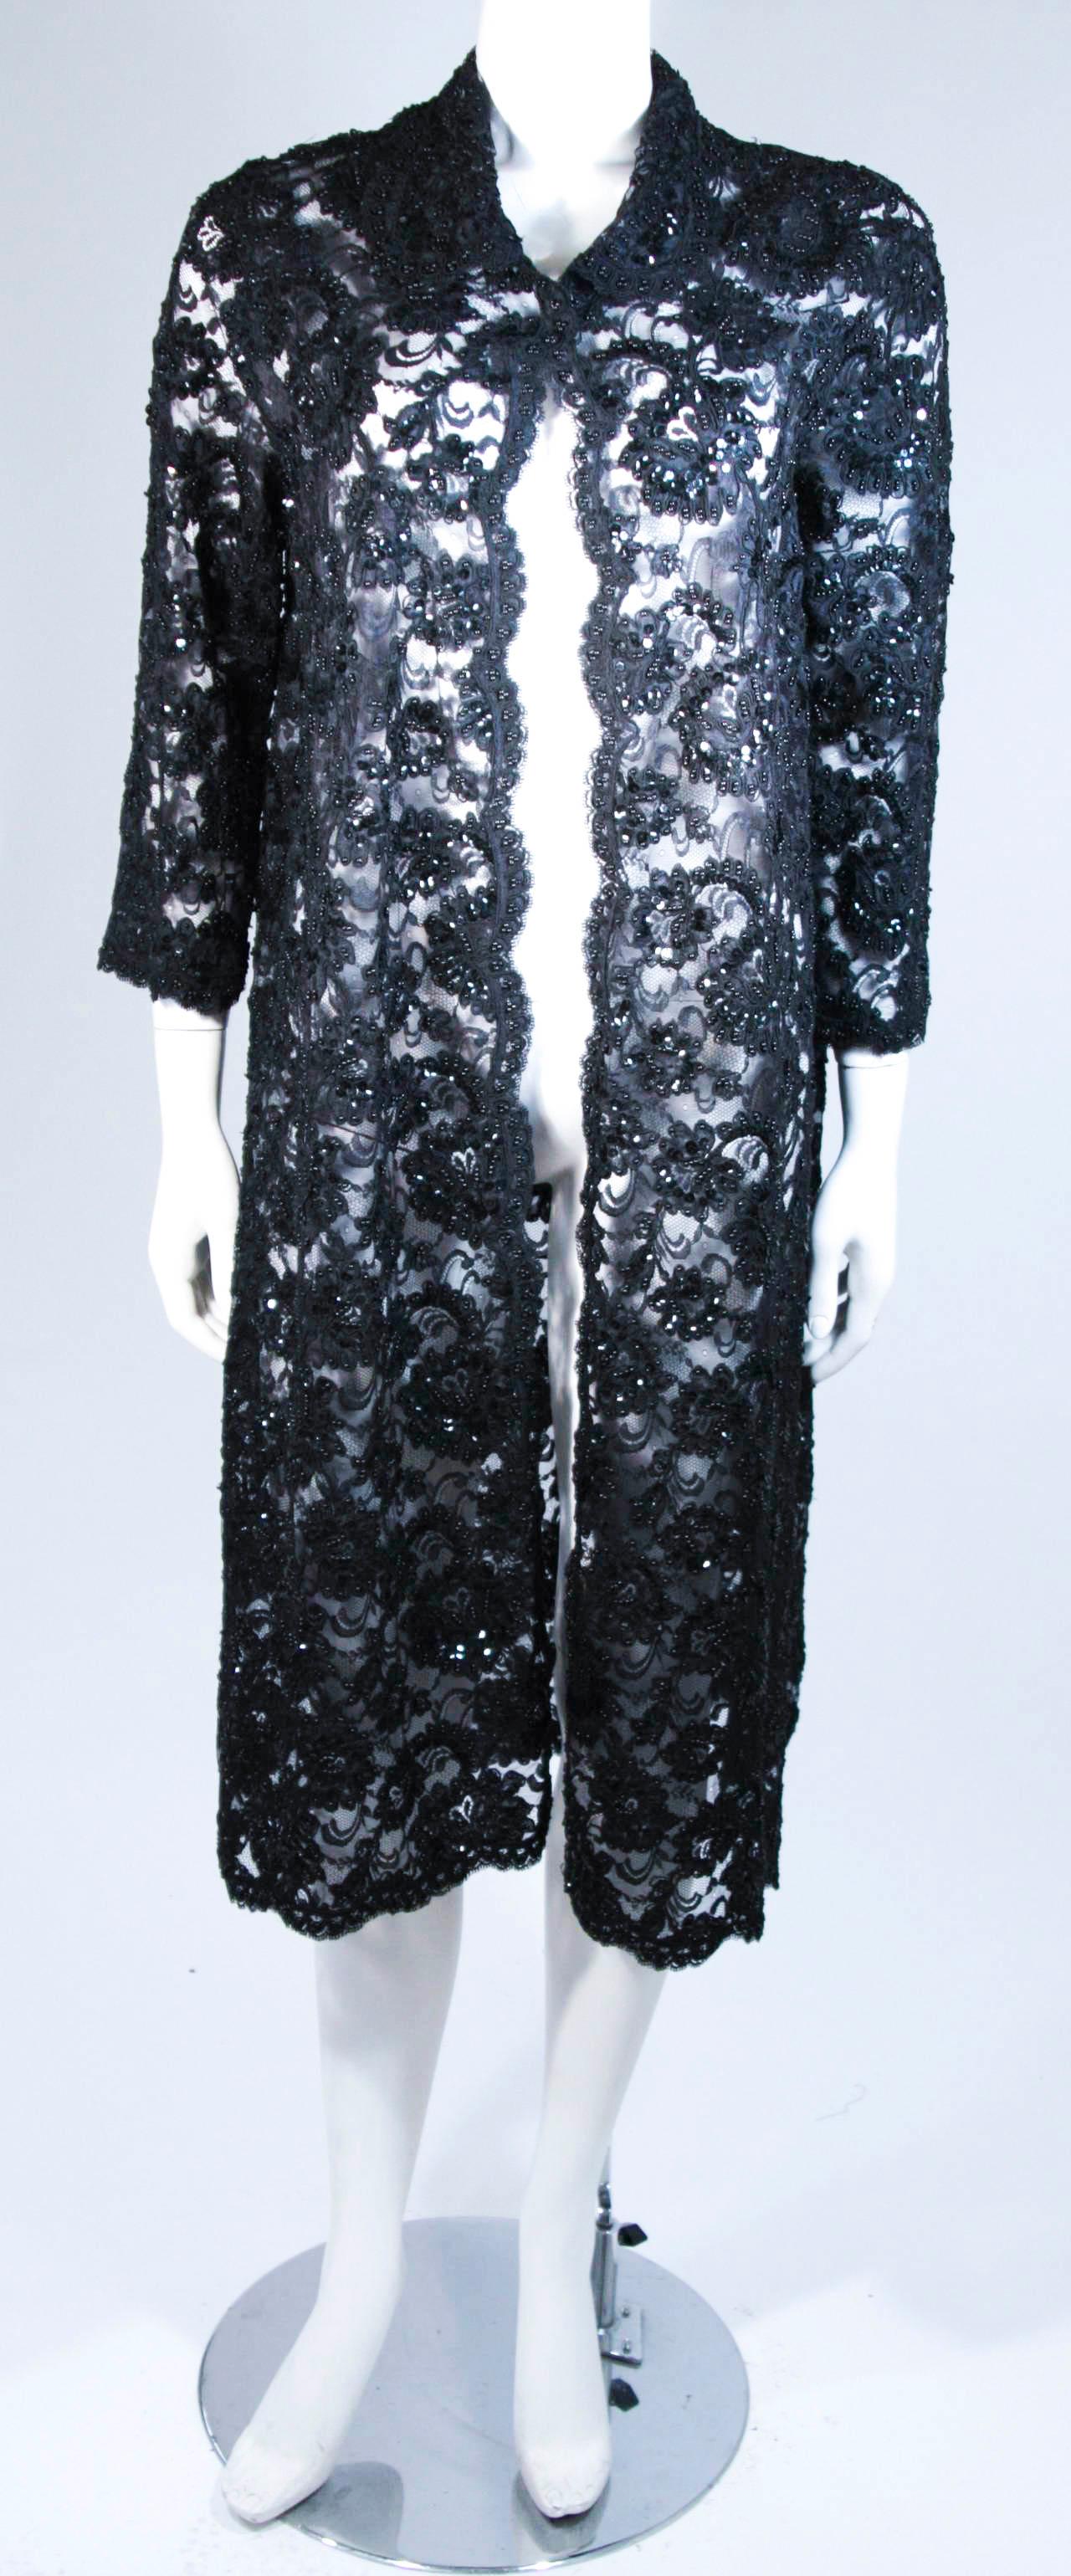 Fashioned from the finest black lace adorned with beading and sequins. This exquisite design can be combined with an ELIZABETH MASON COUTURE cocktail dress as photographed (sold separately). There are hook and eye closures. This is an exceptional